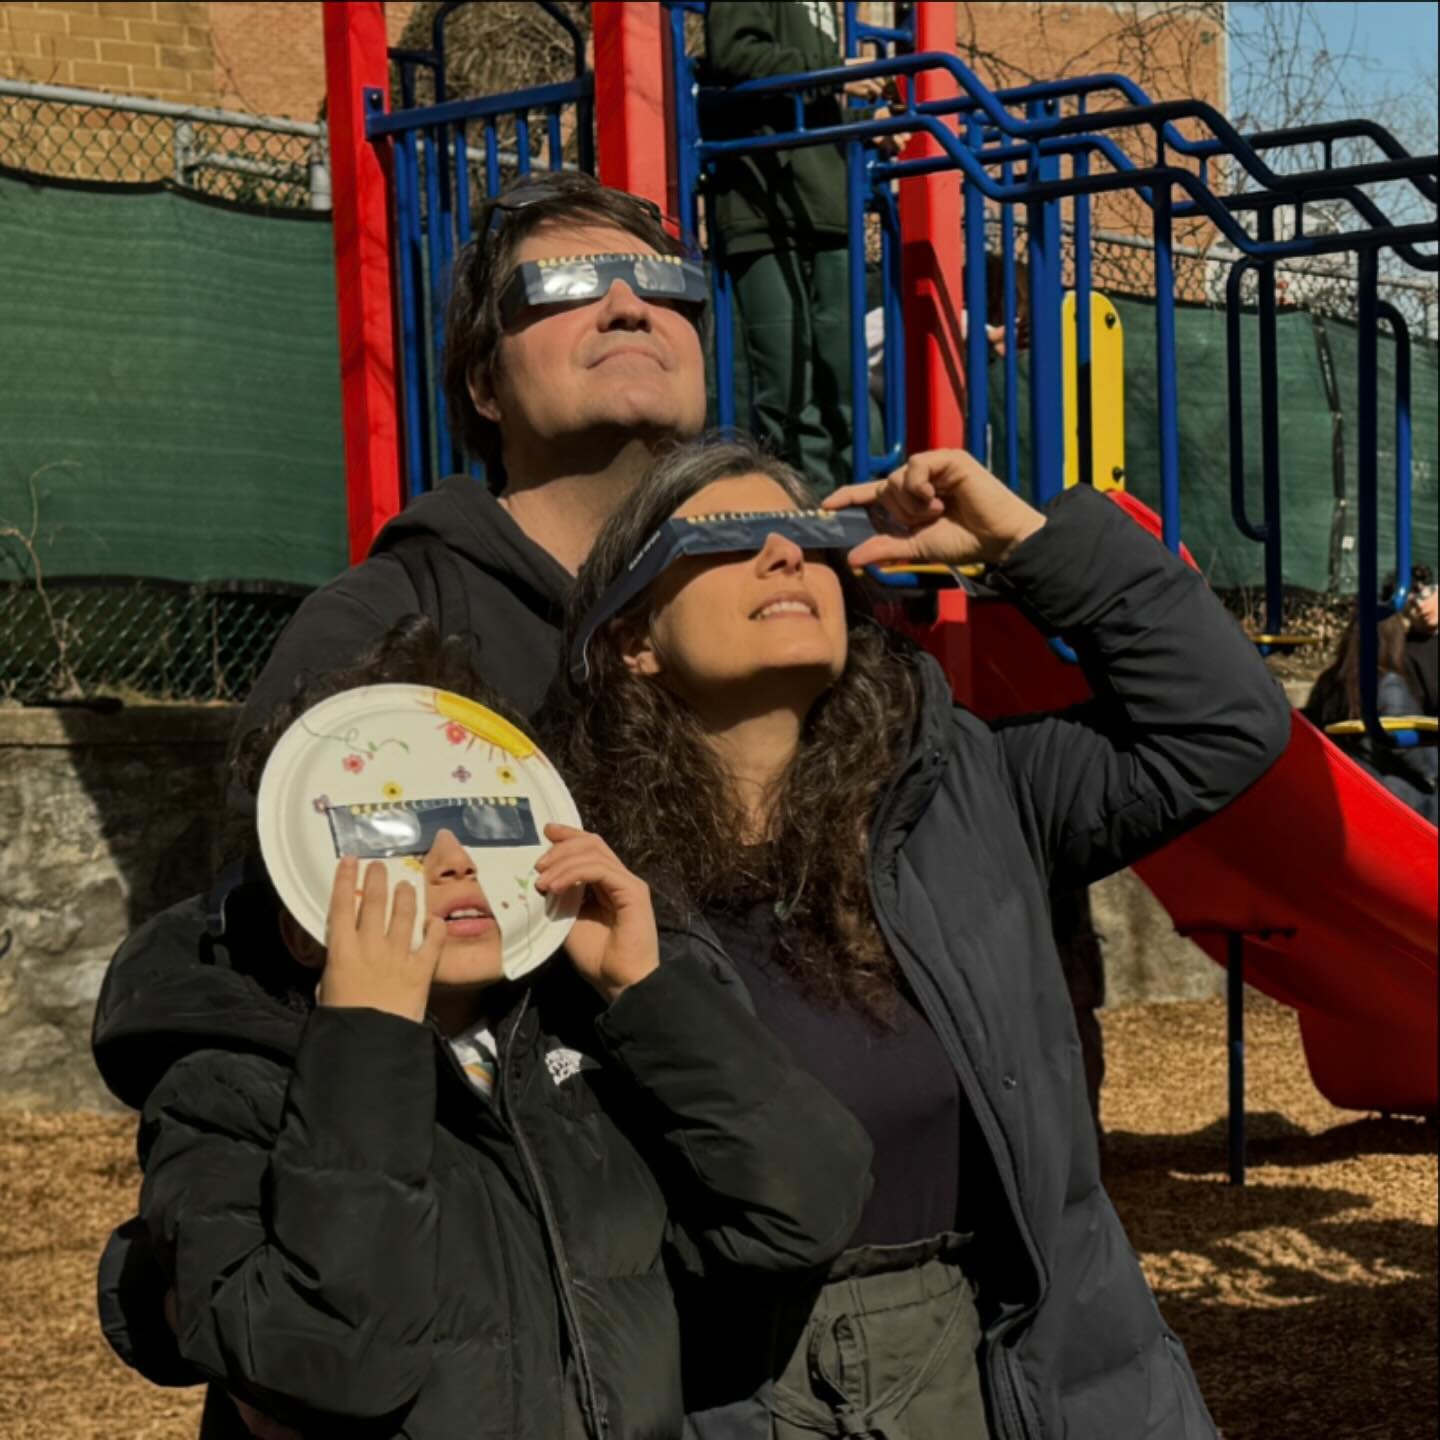 Thank you to the many families who joined us on Monday for the eclipse viewing fair at The Priory, complete with space-themed activities. We were incredibly fortunate to have clear skies, allowing us to gather in amazement at the beauty of the eclips